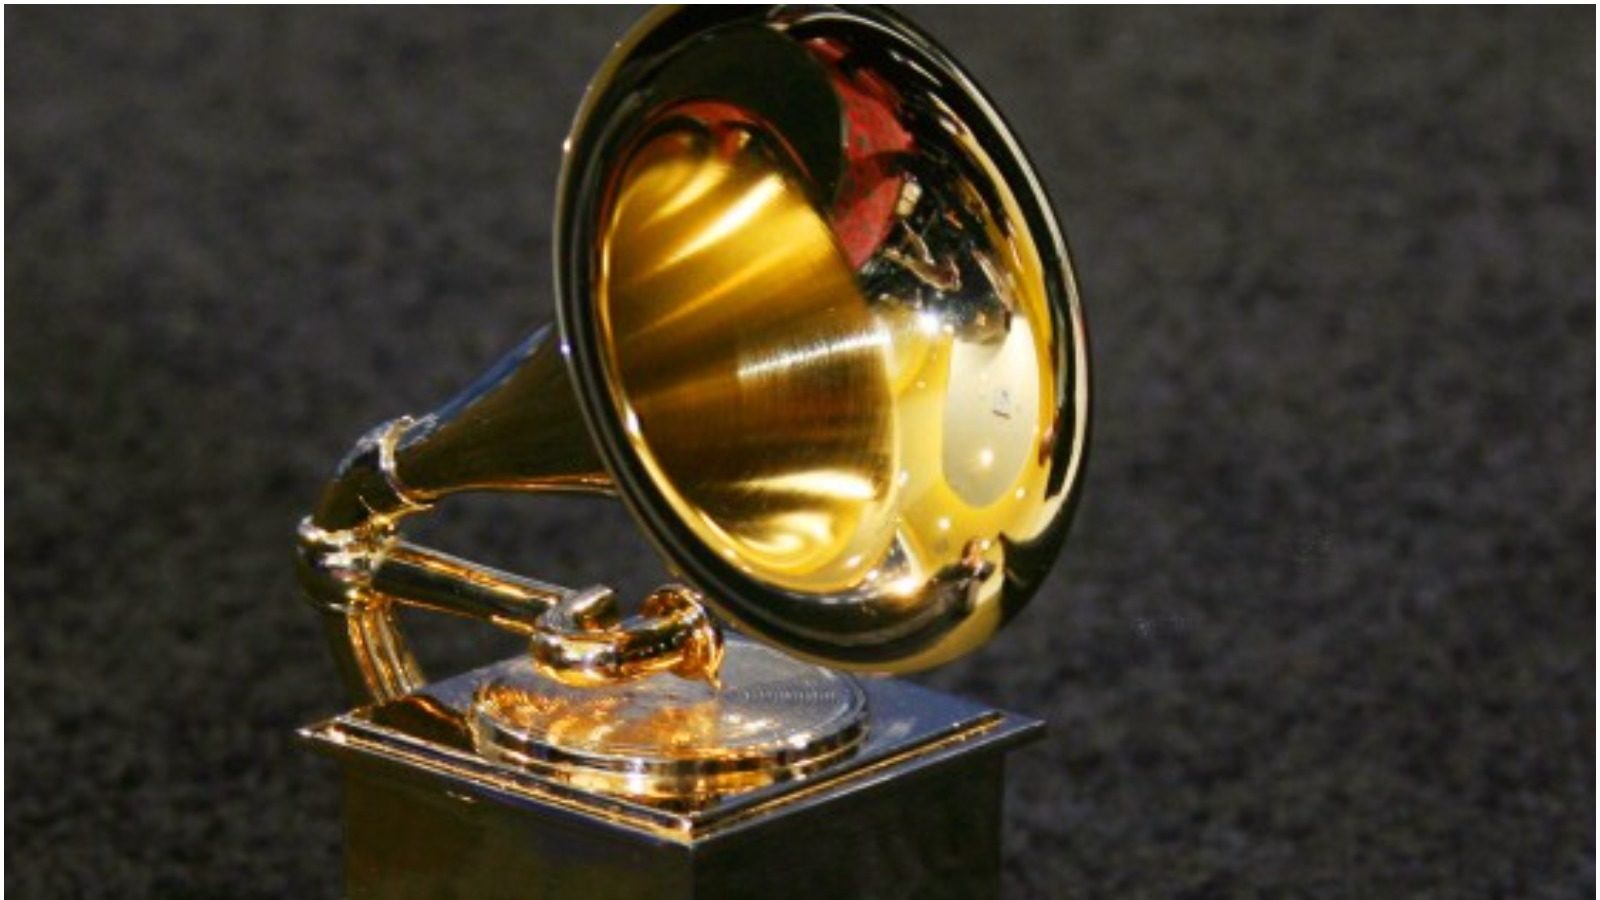 Grammy Awards 2022: The Grammy Award trophy is priceless, know something about it
